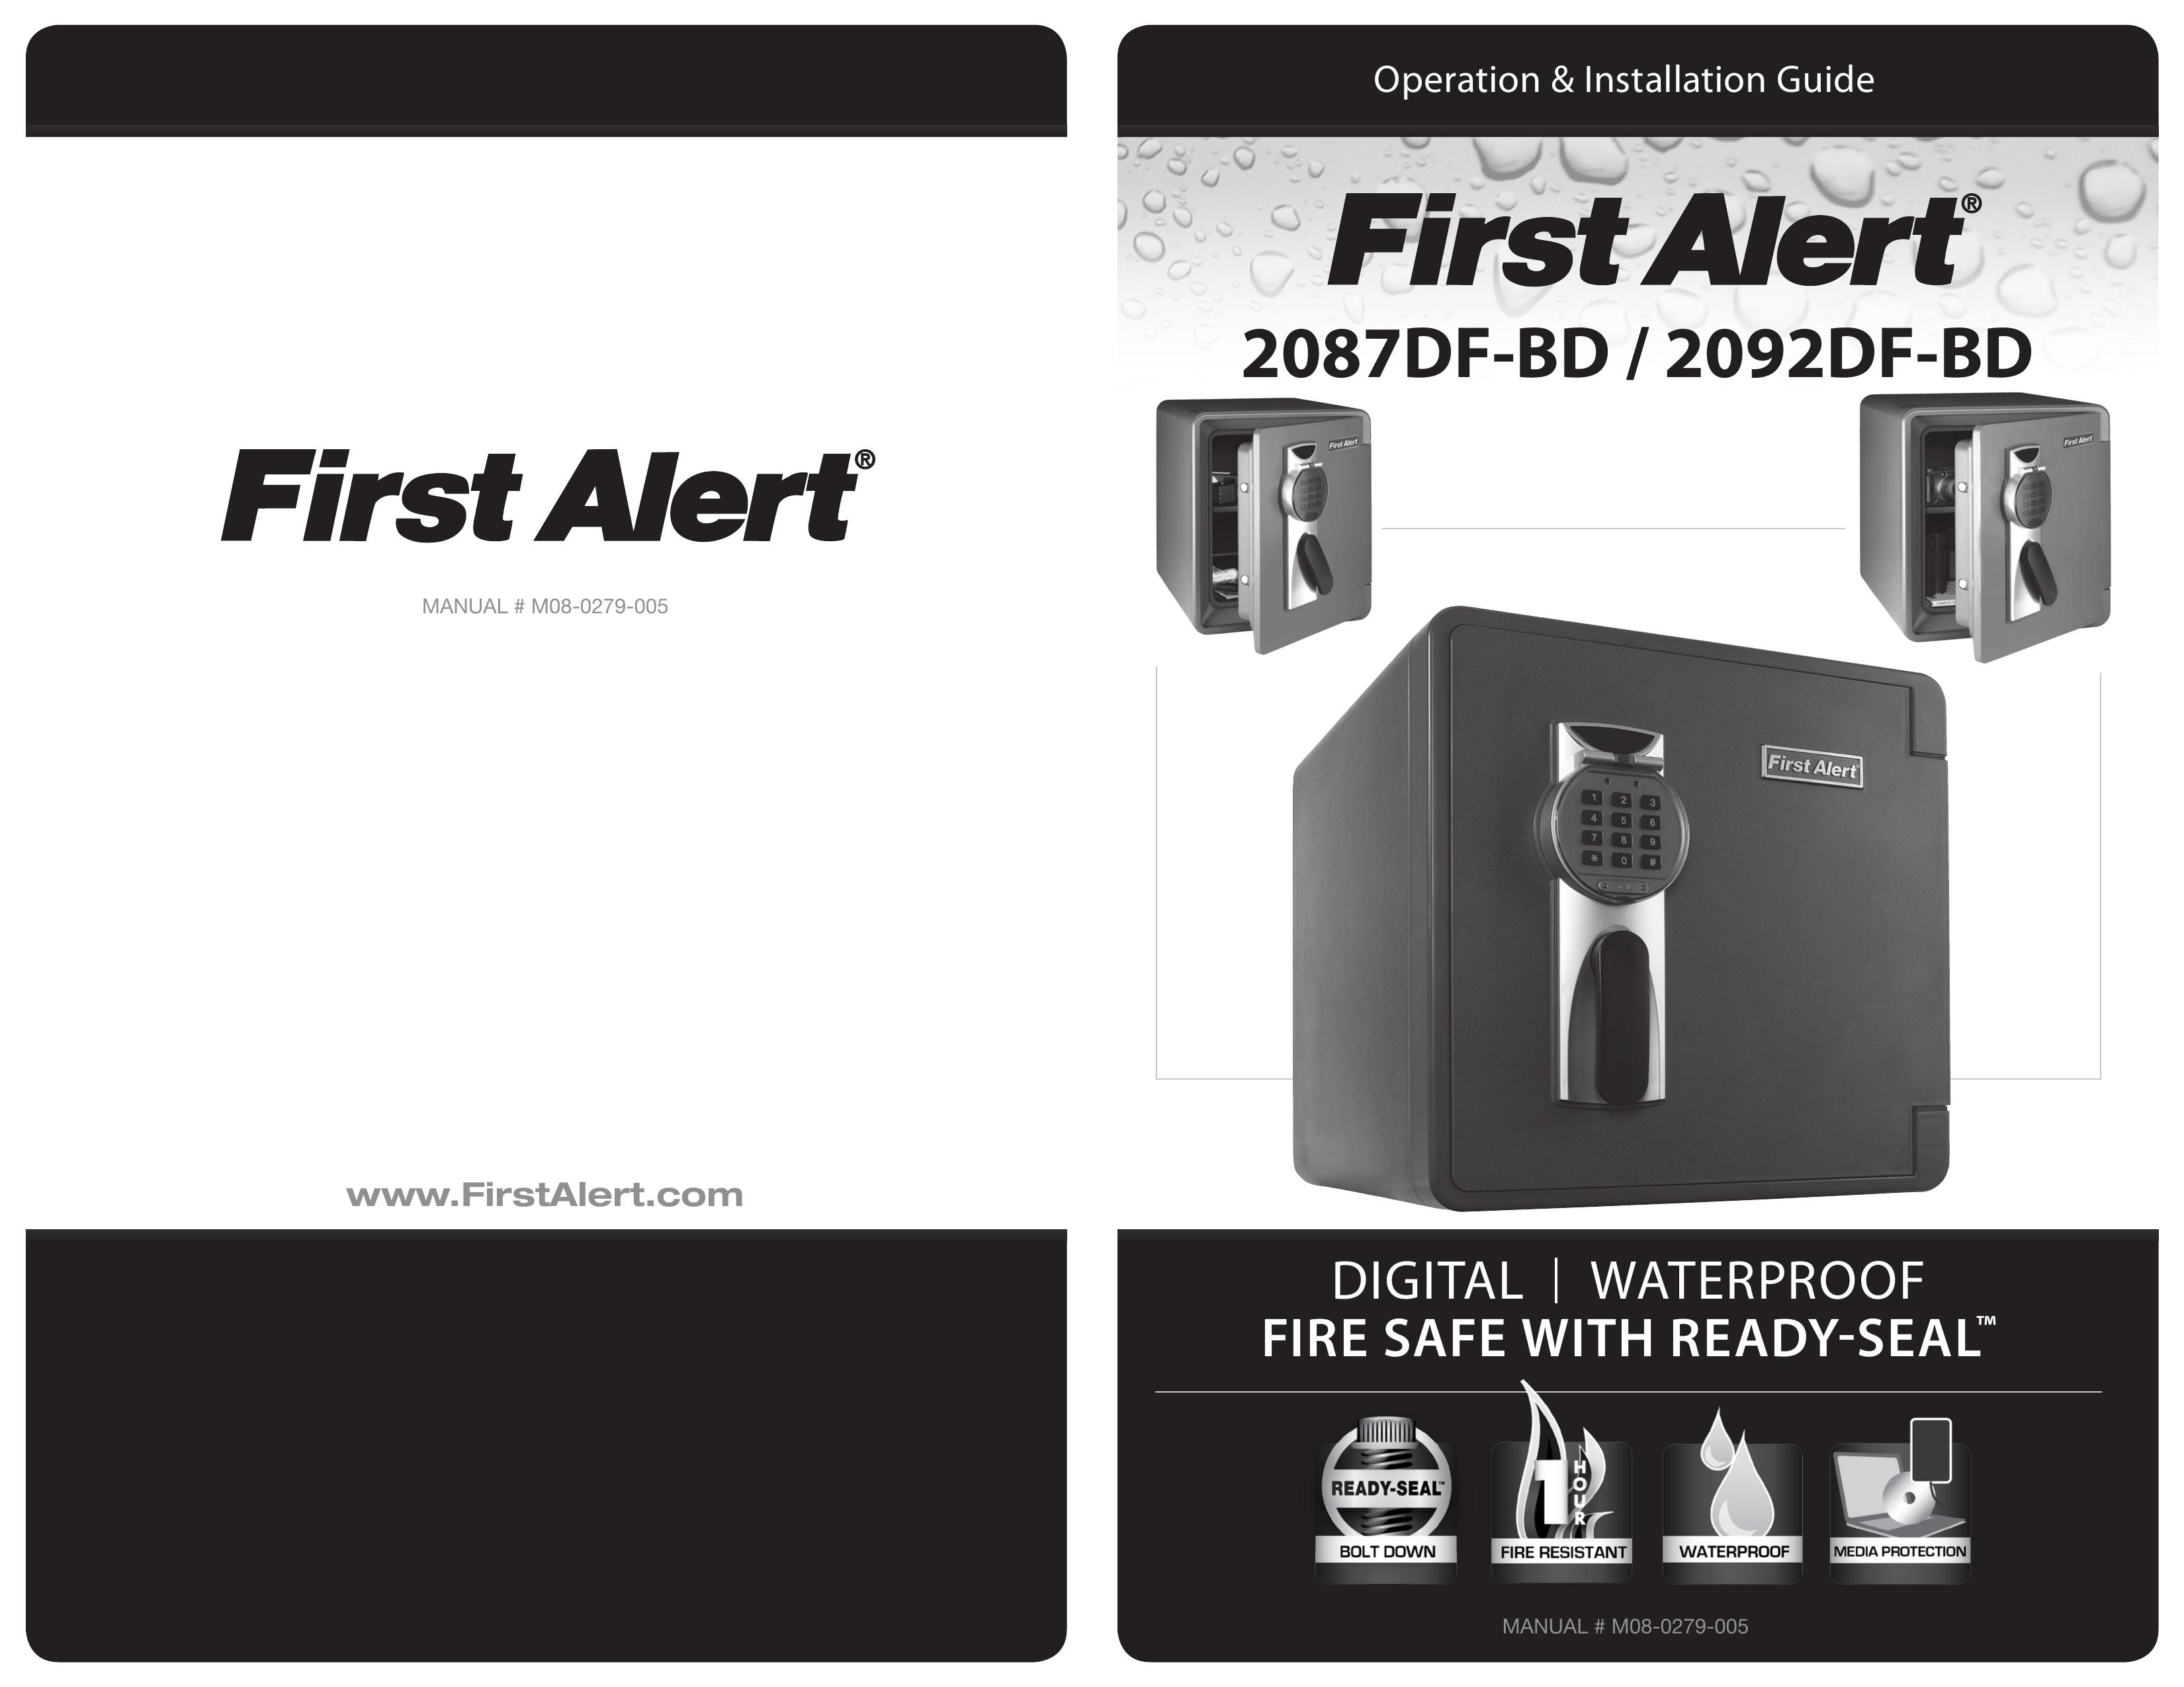 First Alert digital waterproof fire safe with ready-seal Microscope & Magnifier User Manual